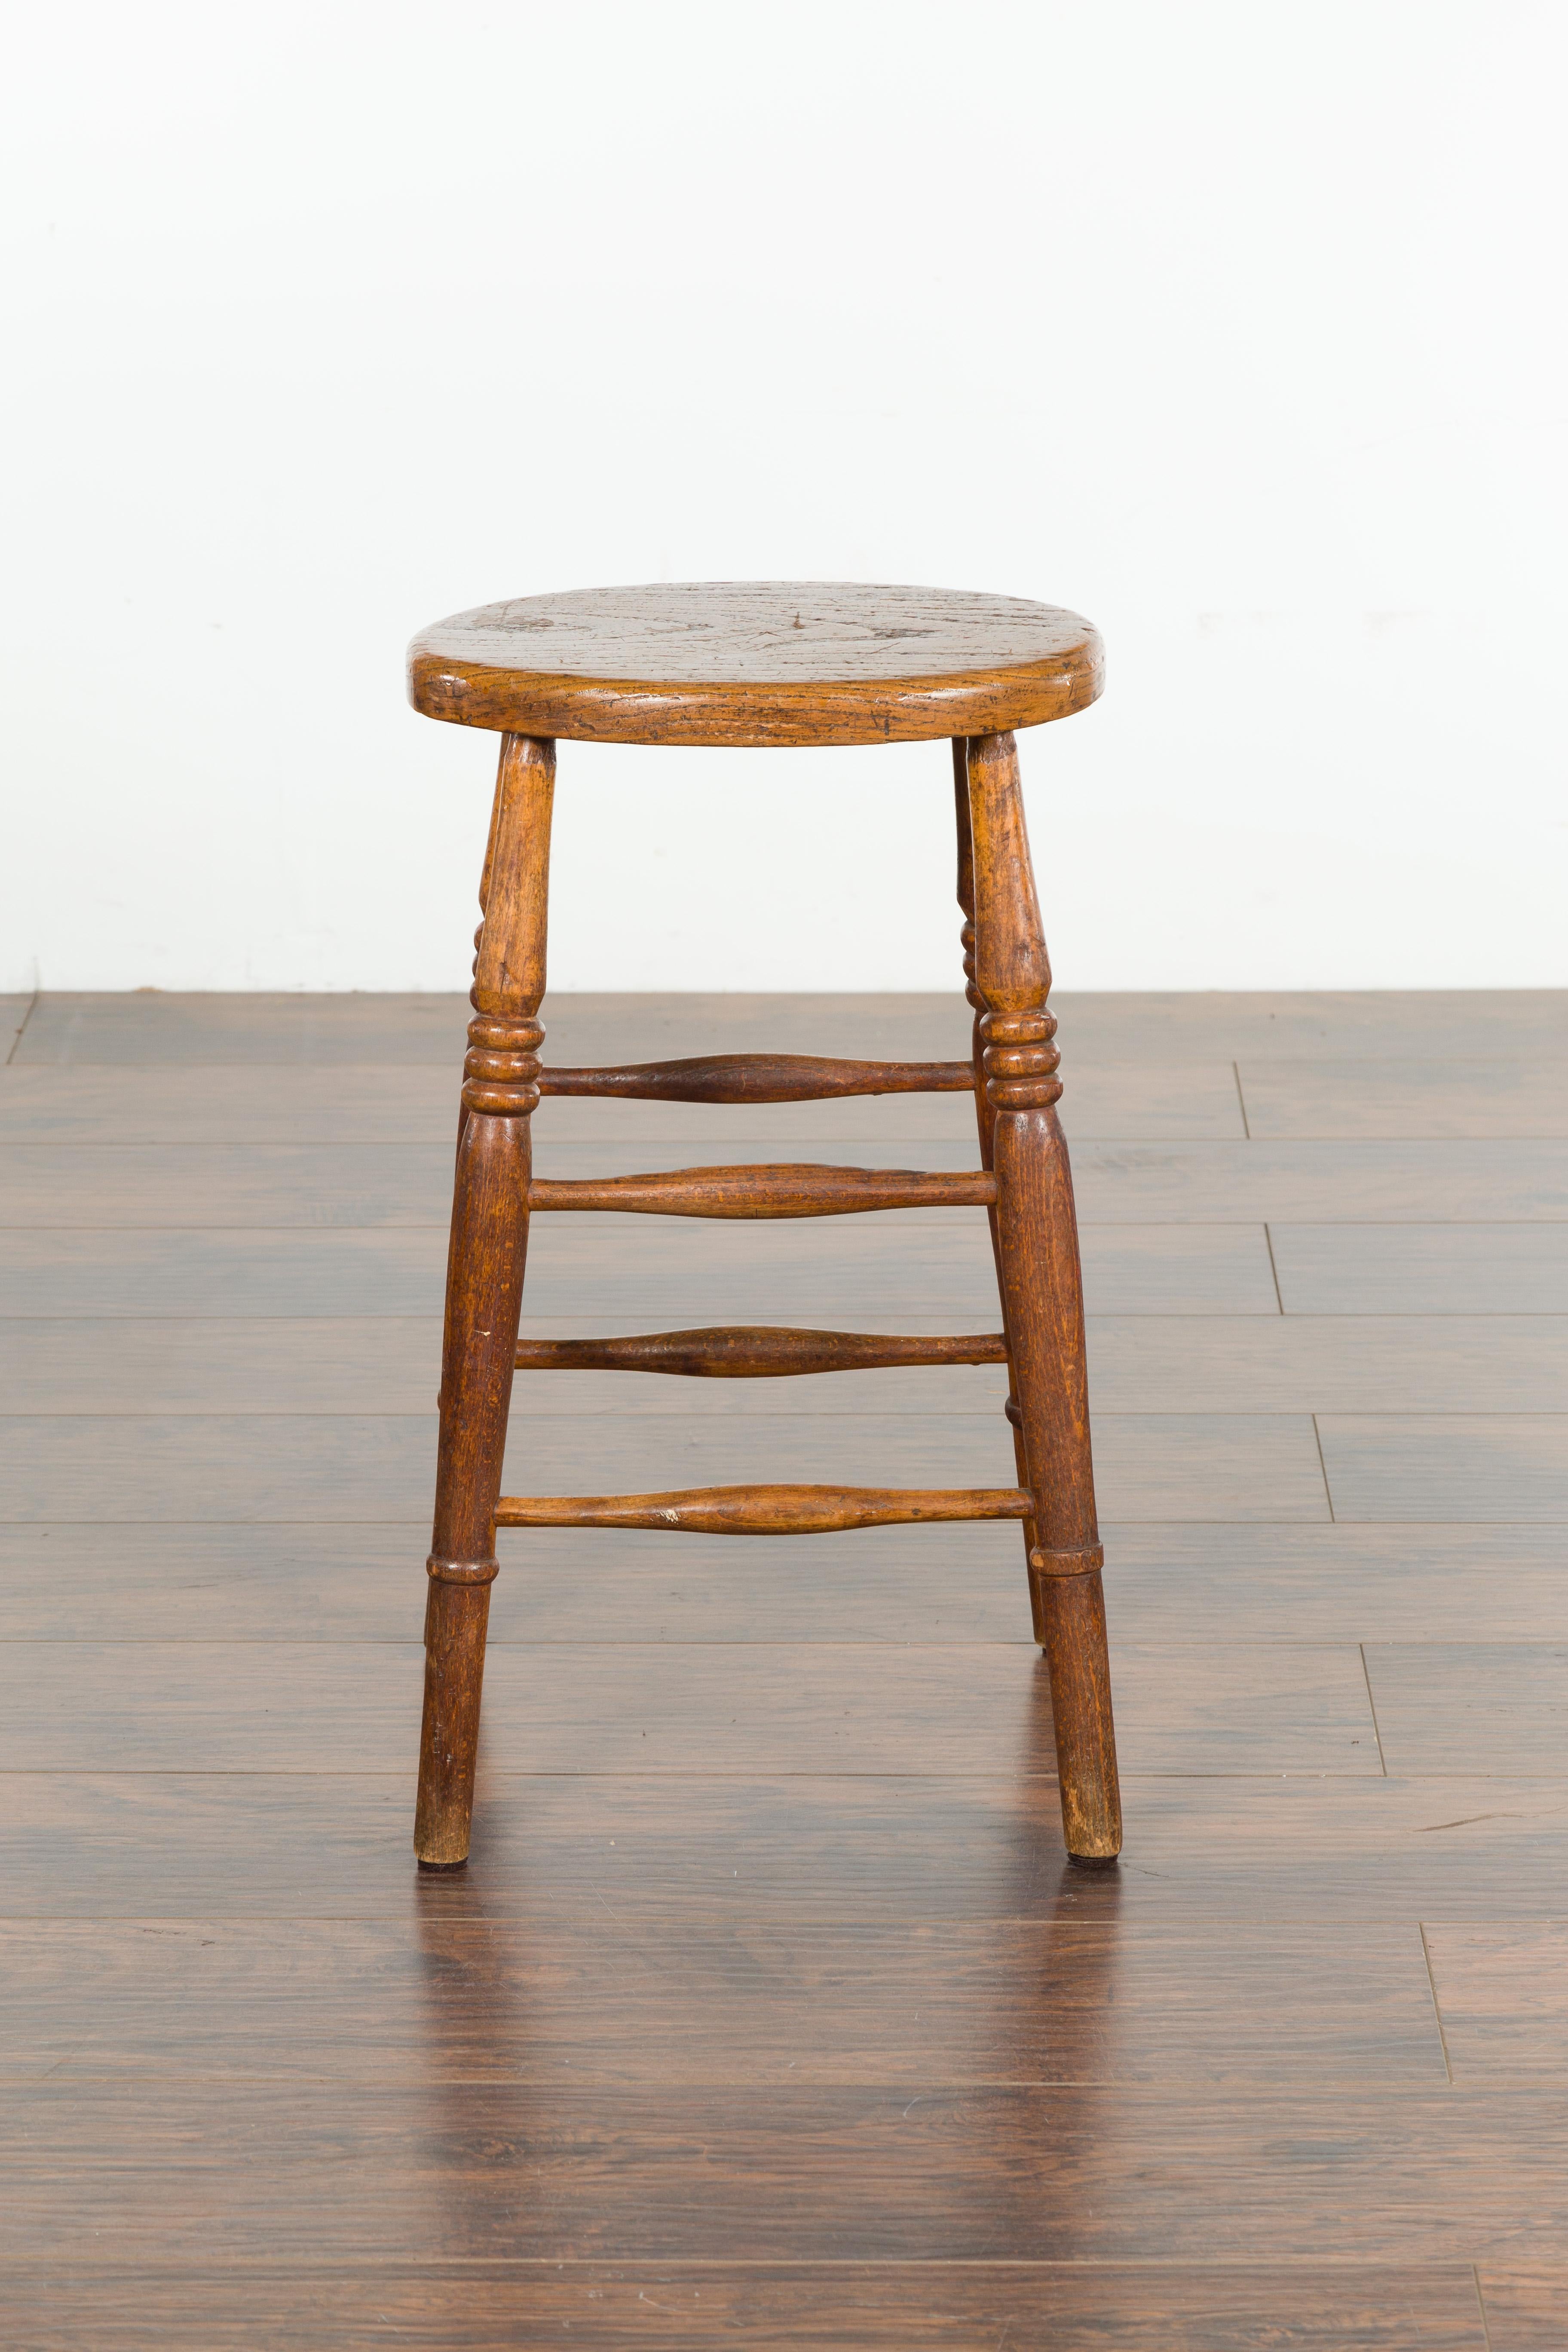 Rustic English 1880s Elm Stool with Oval Seat, Turned Splaying Legs and Side Stretchers